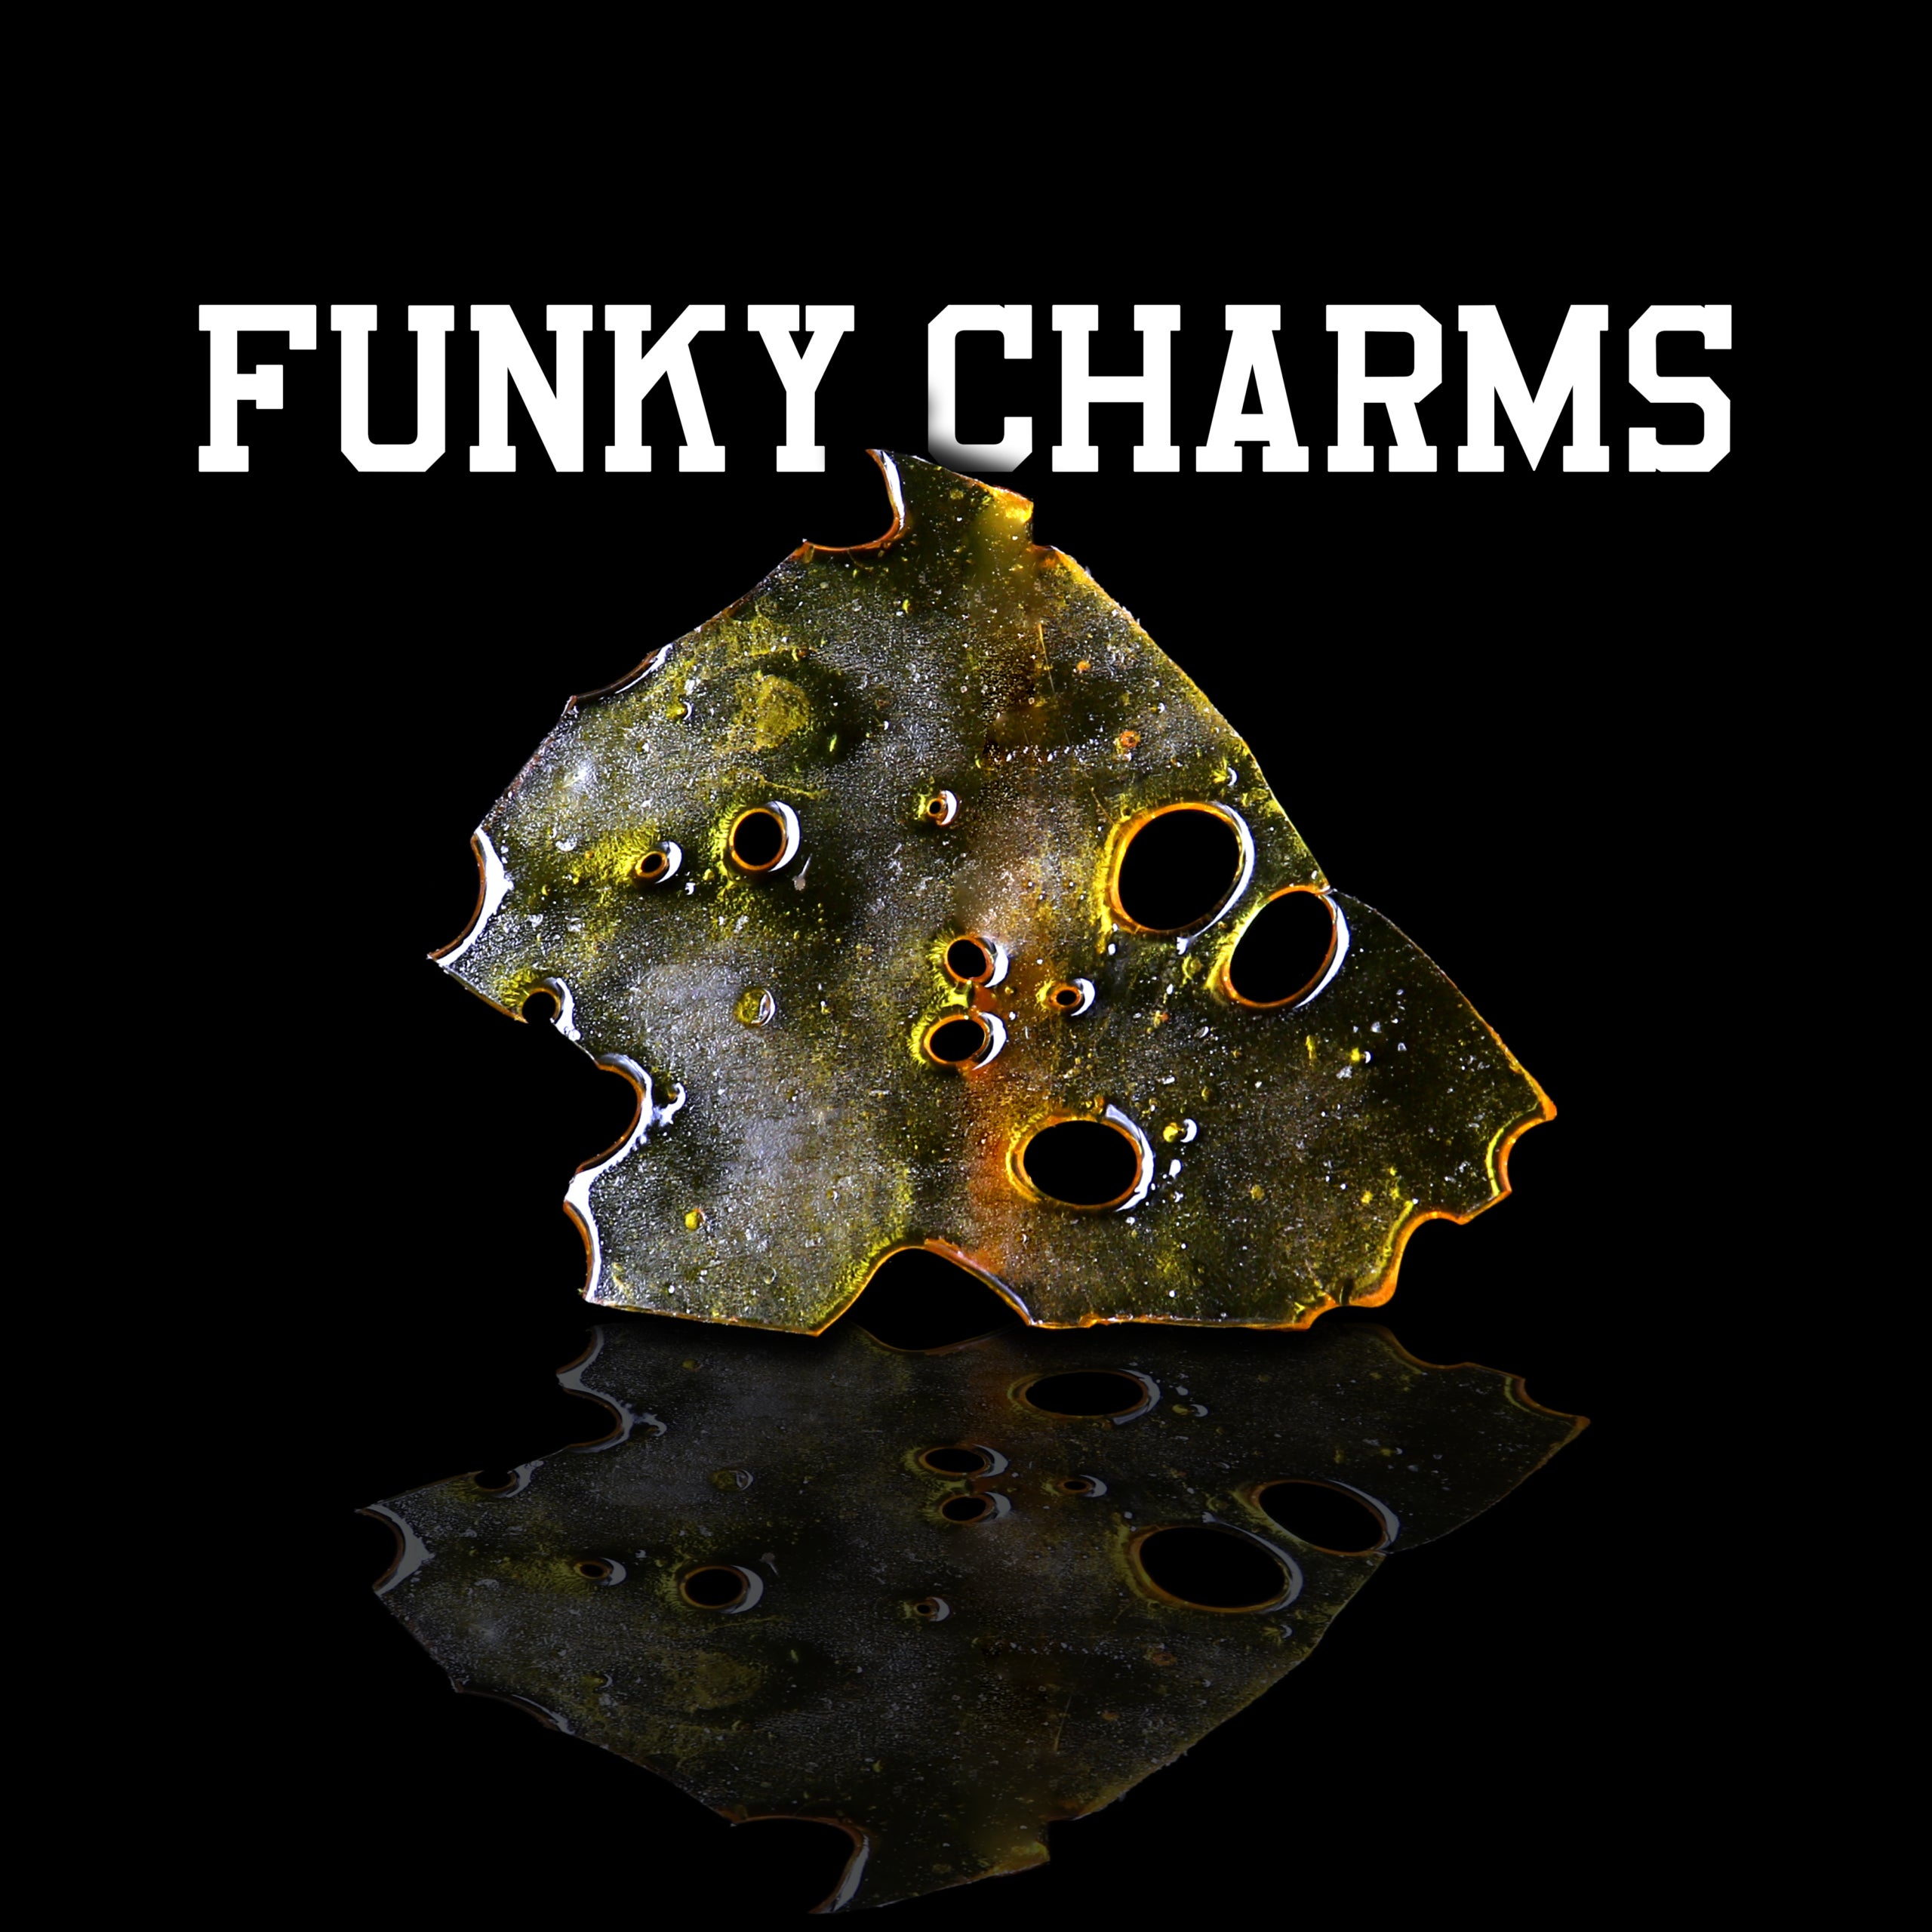 FUNKY CHARMS